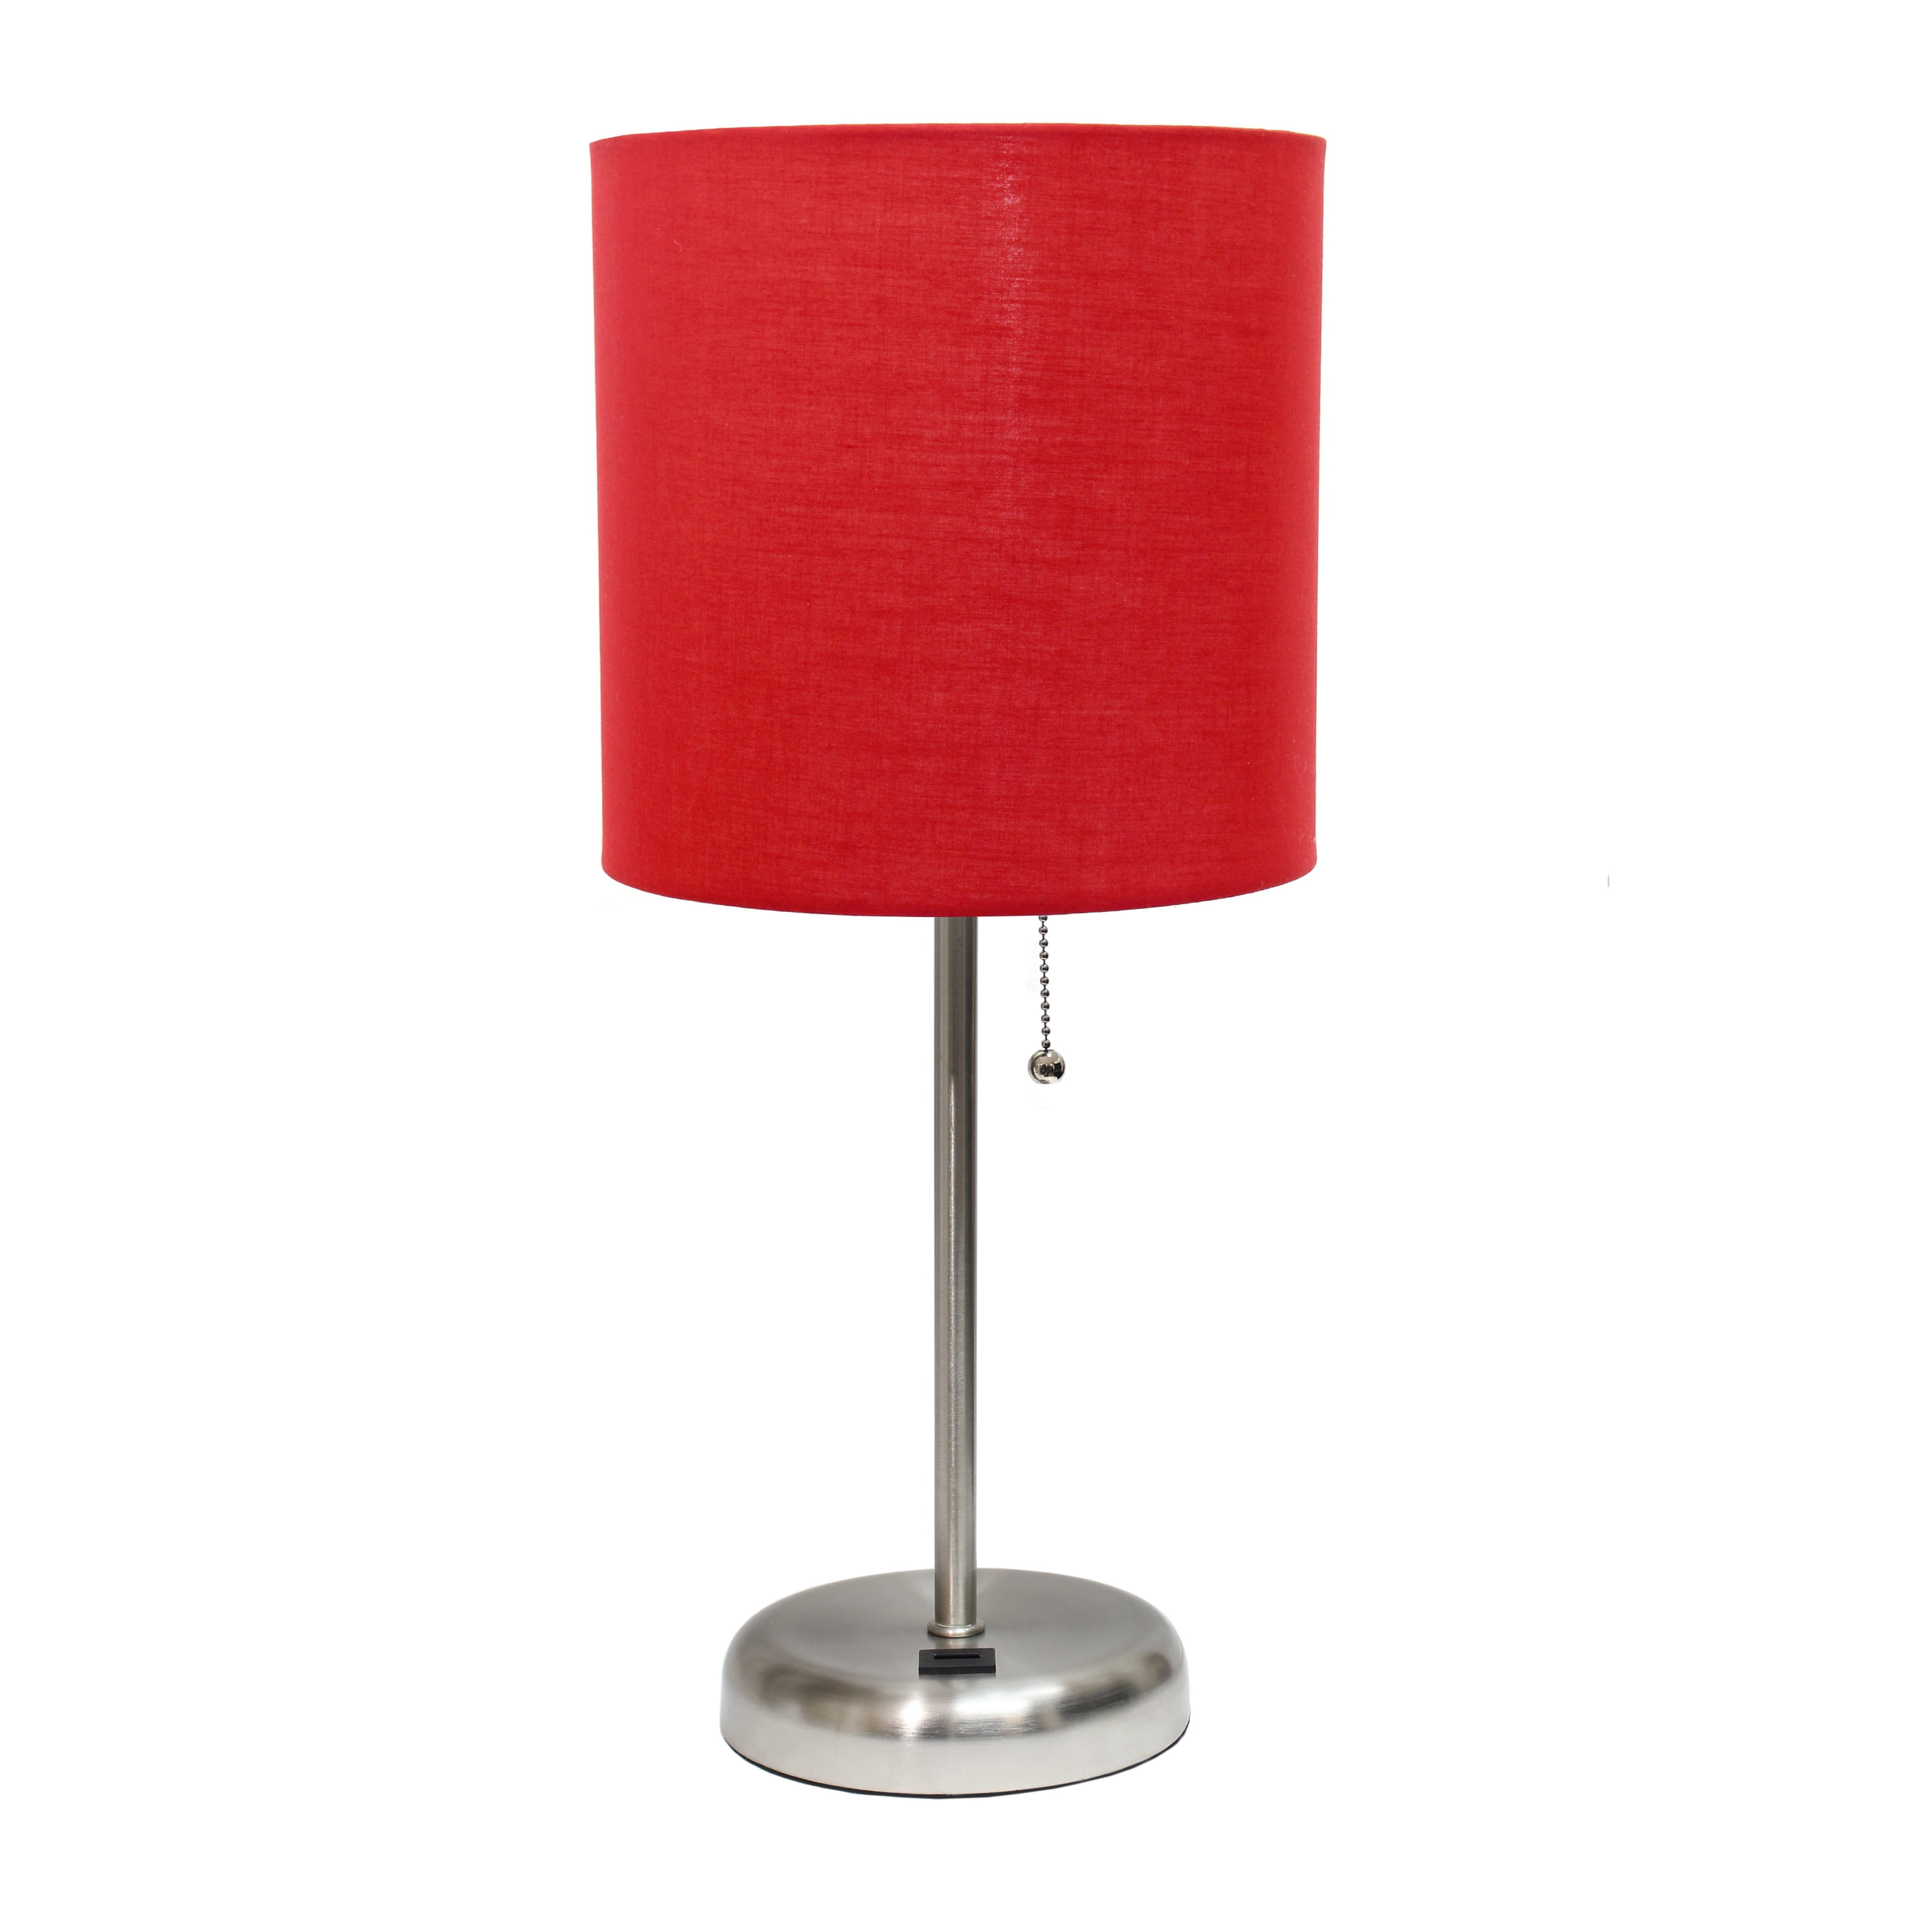 Lt2044-red Stick Table Lamp With Usb Charging Port & Fabric Shade, Red